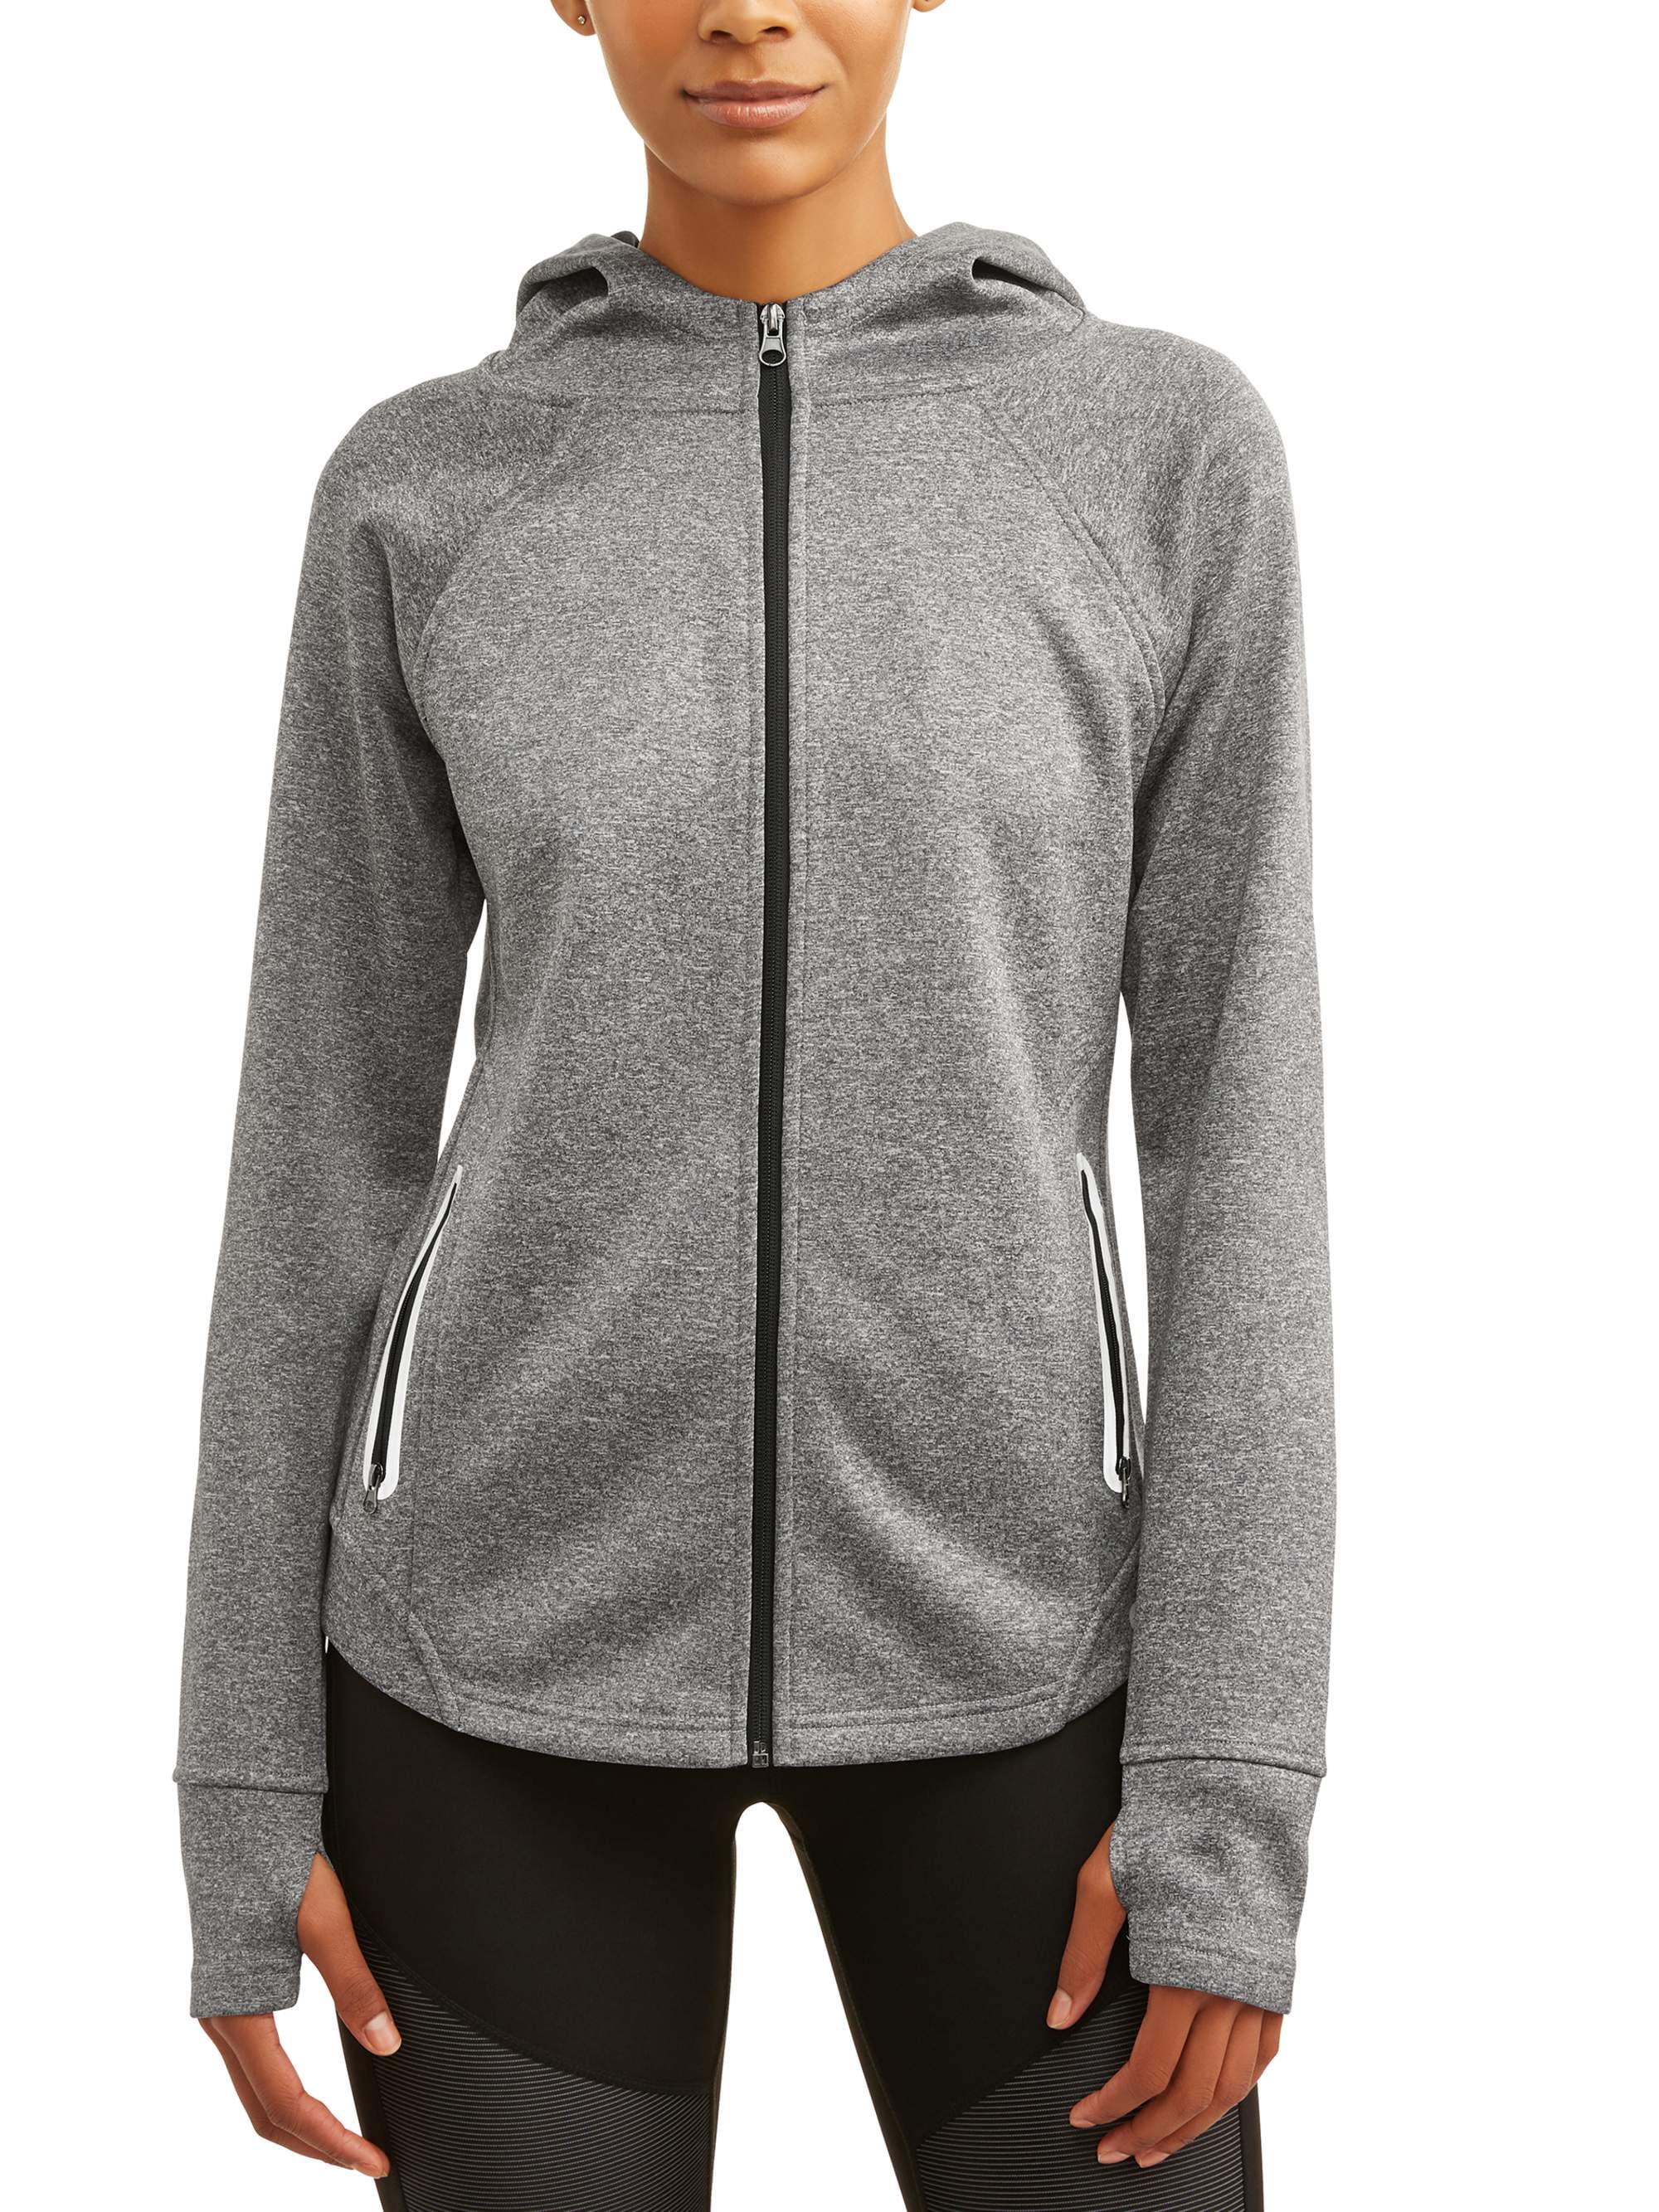 Women's Active Performance Yoga Jacket with Hoodie and Reflective ...